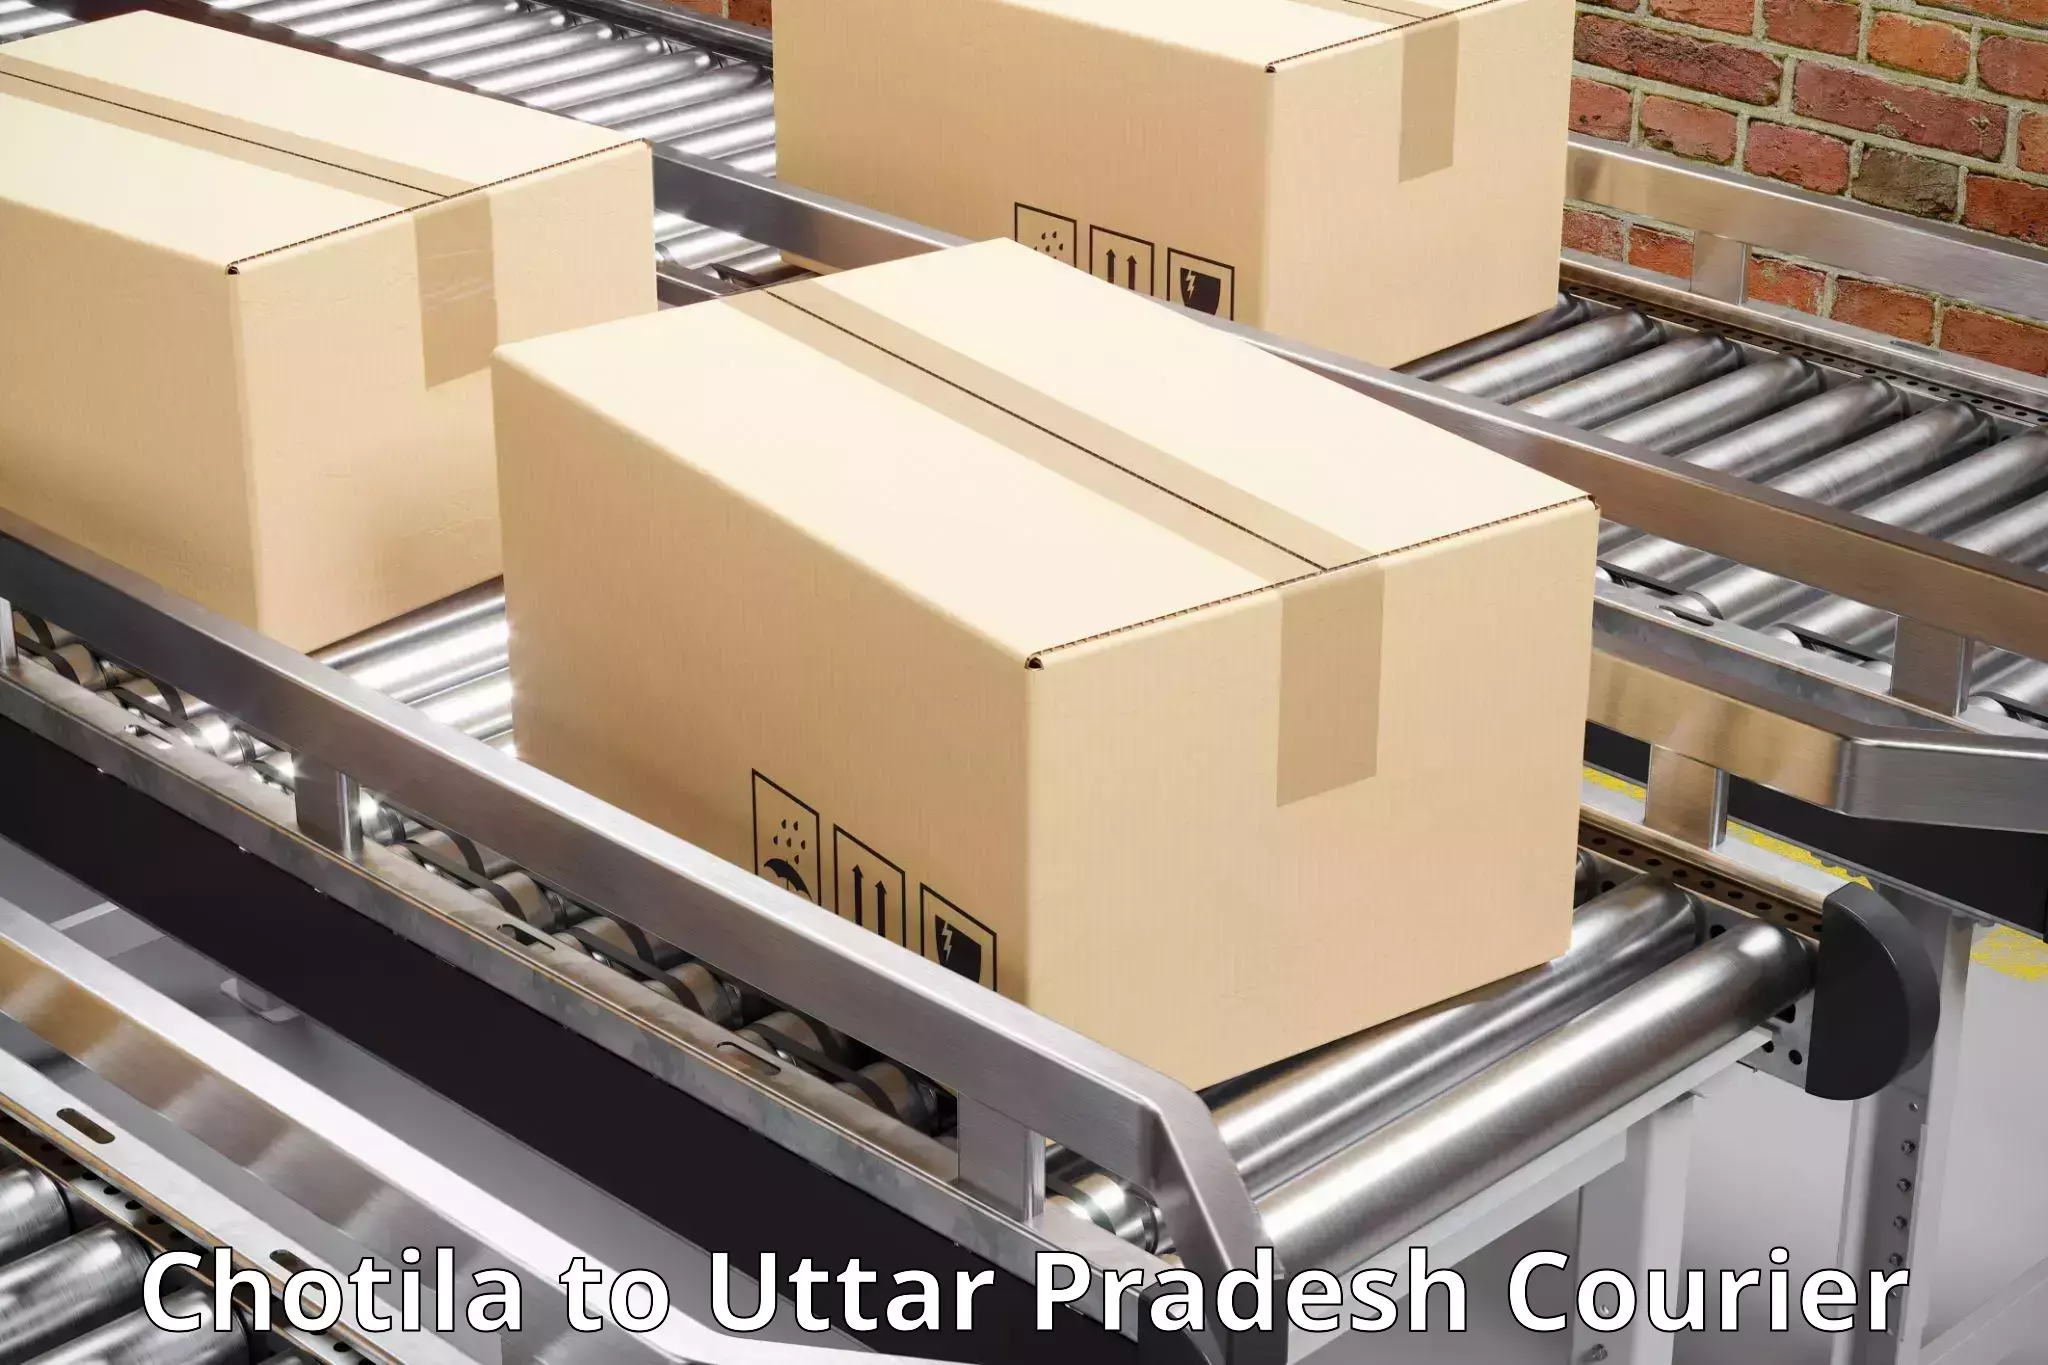 Parcel service for businesses Chotila to Utraula